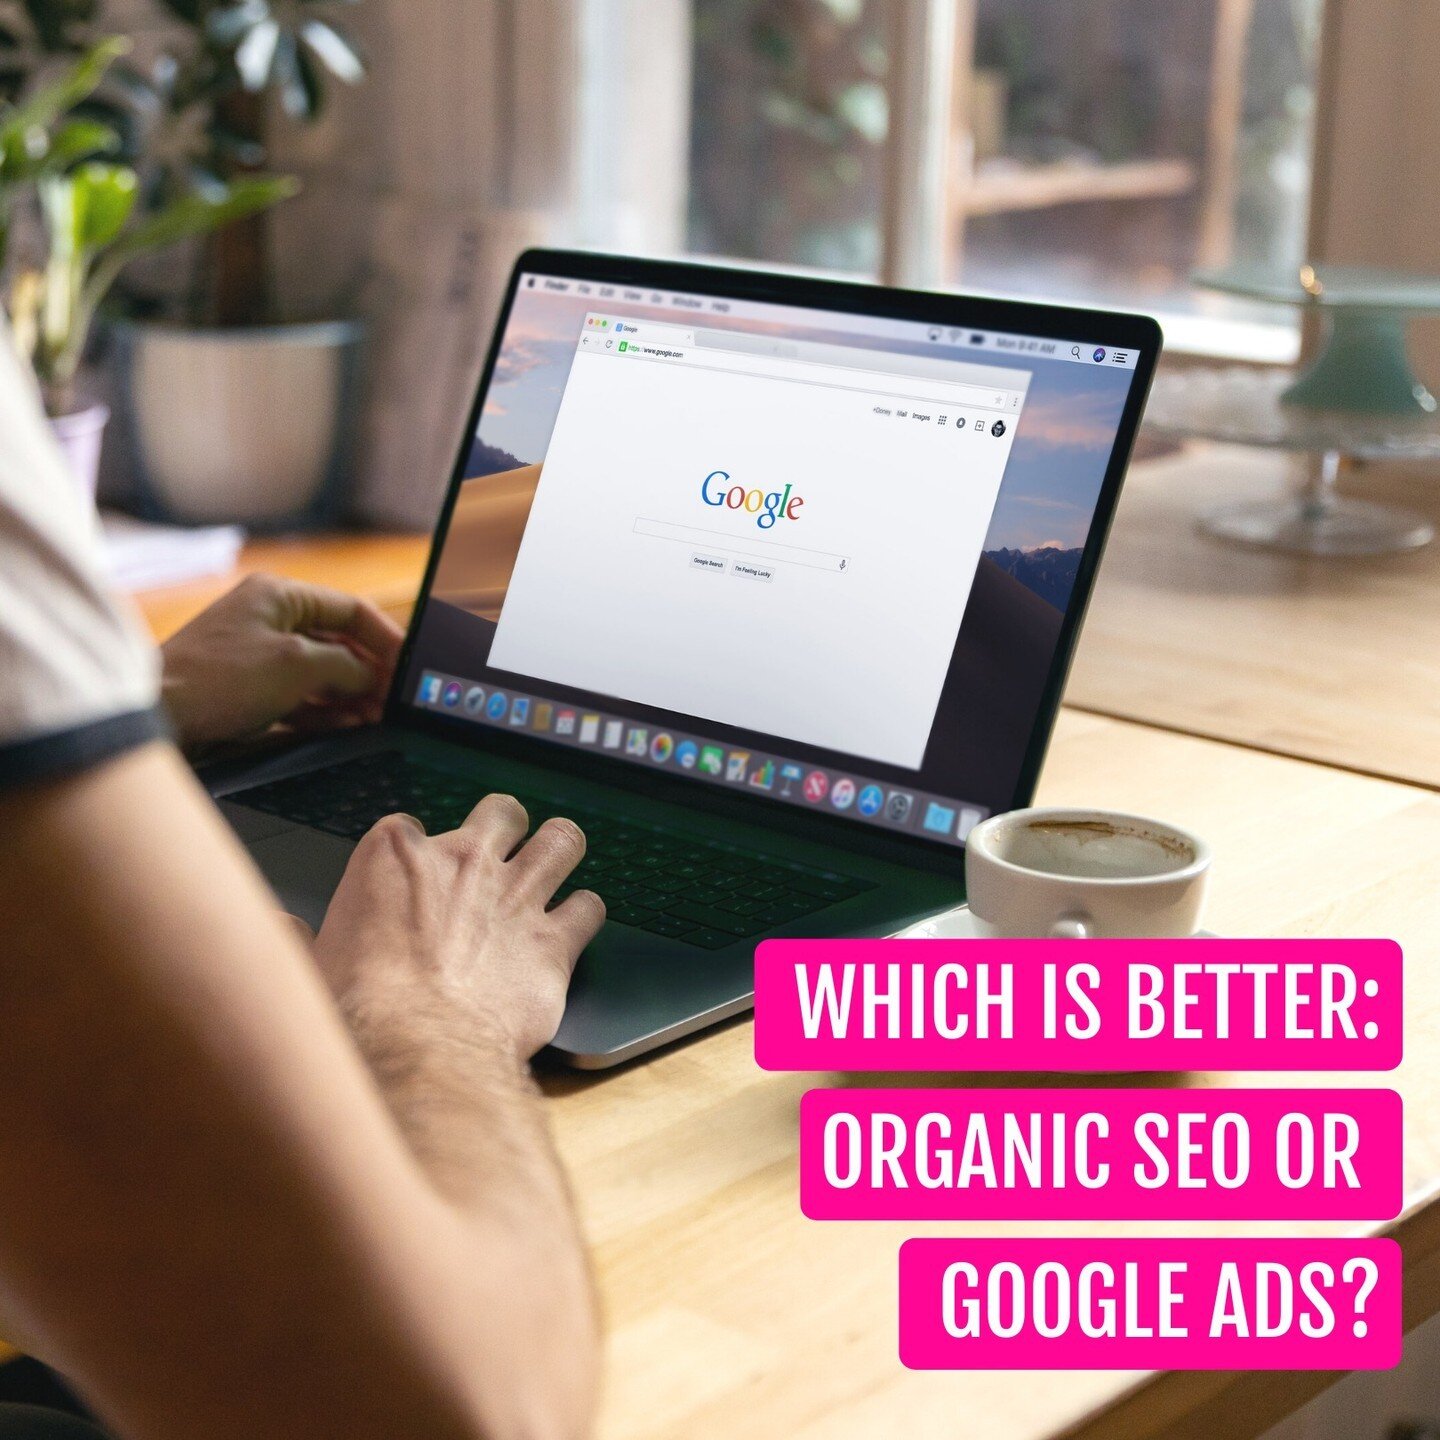 Which one is a better investment... organic SEO (search engine optimisation) or paid Google ads?

Well, it depends! They also go great together if you want to do both.

But to help you understand the differences, here's a quick explanation...

SEO is